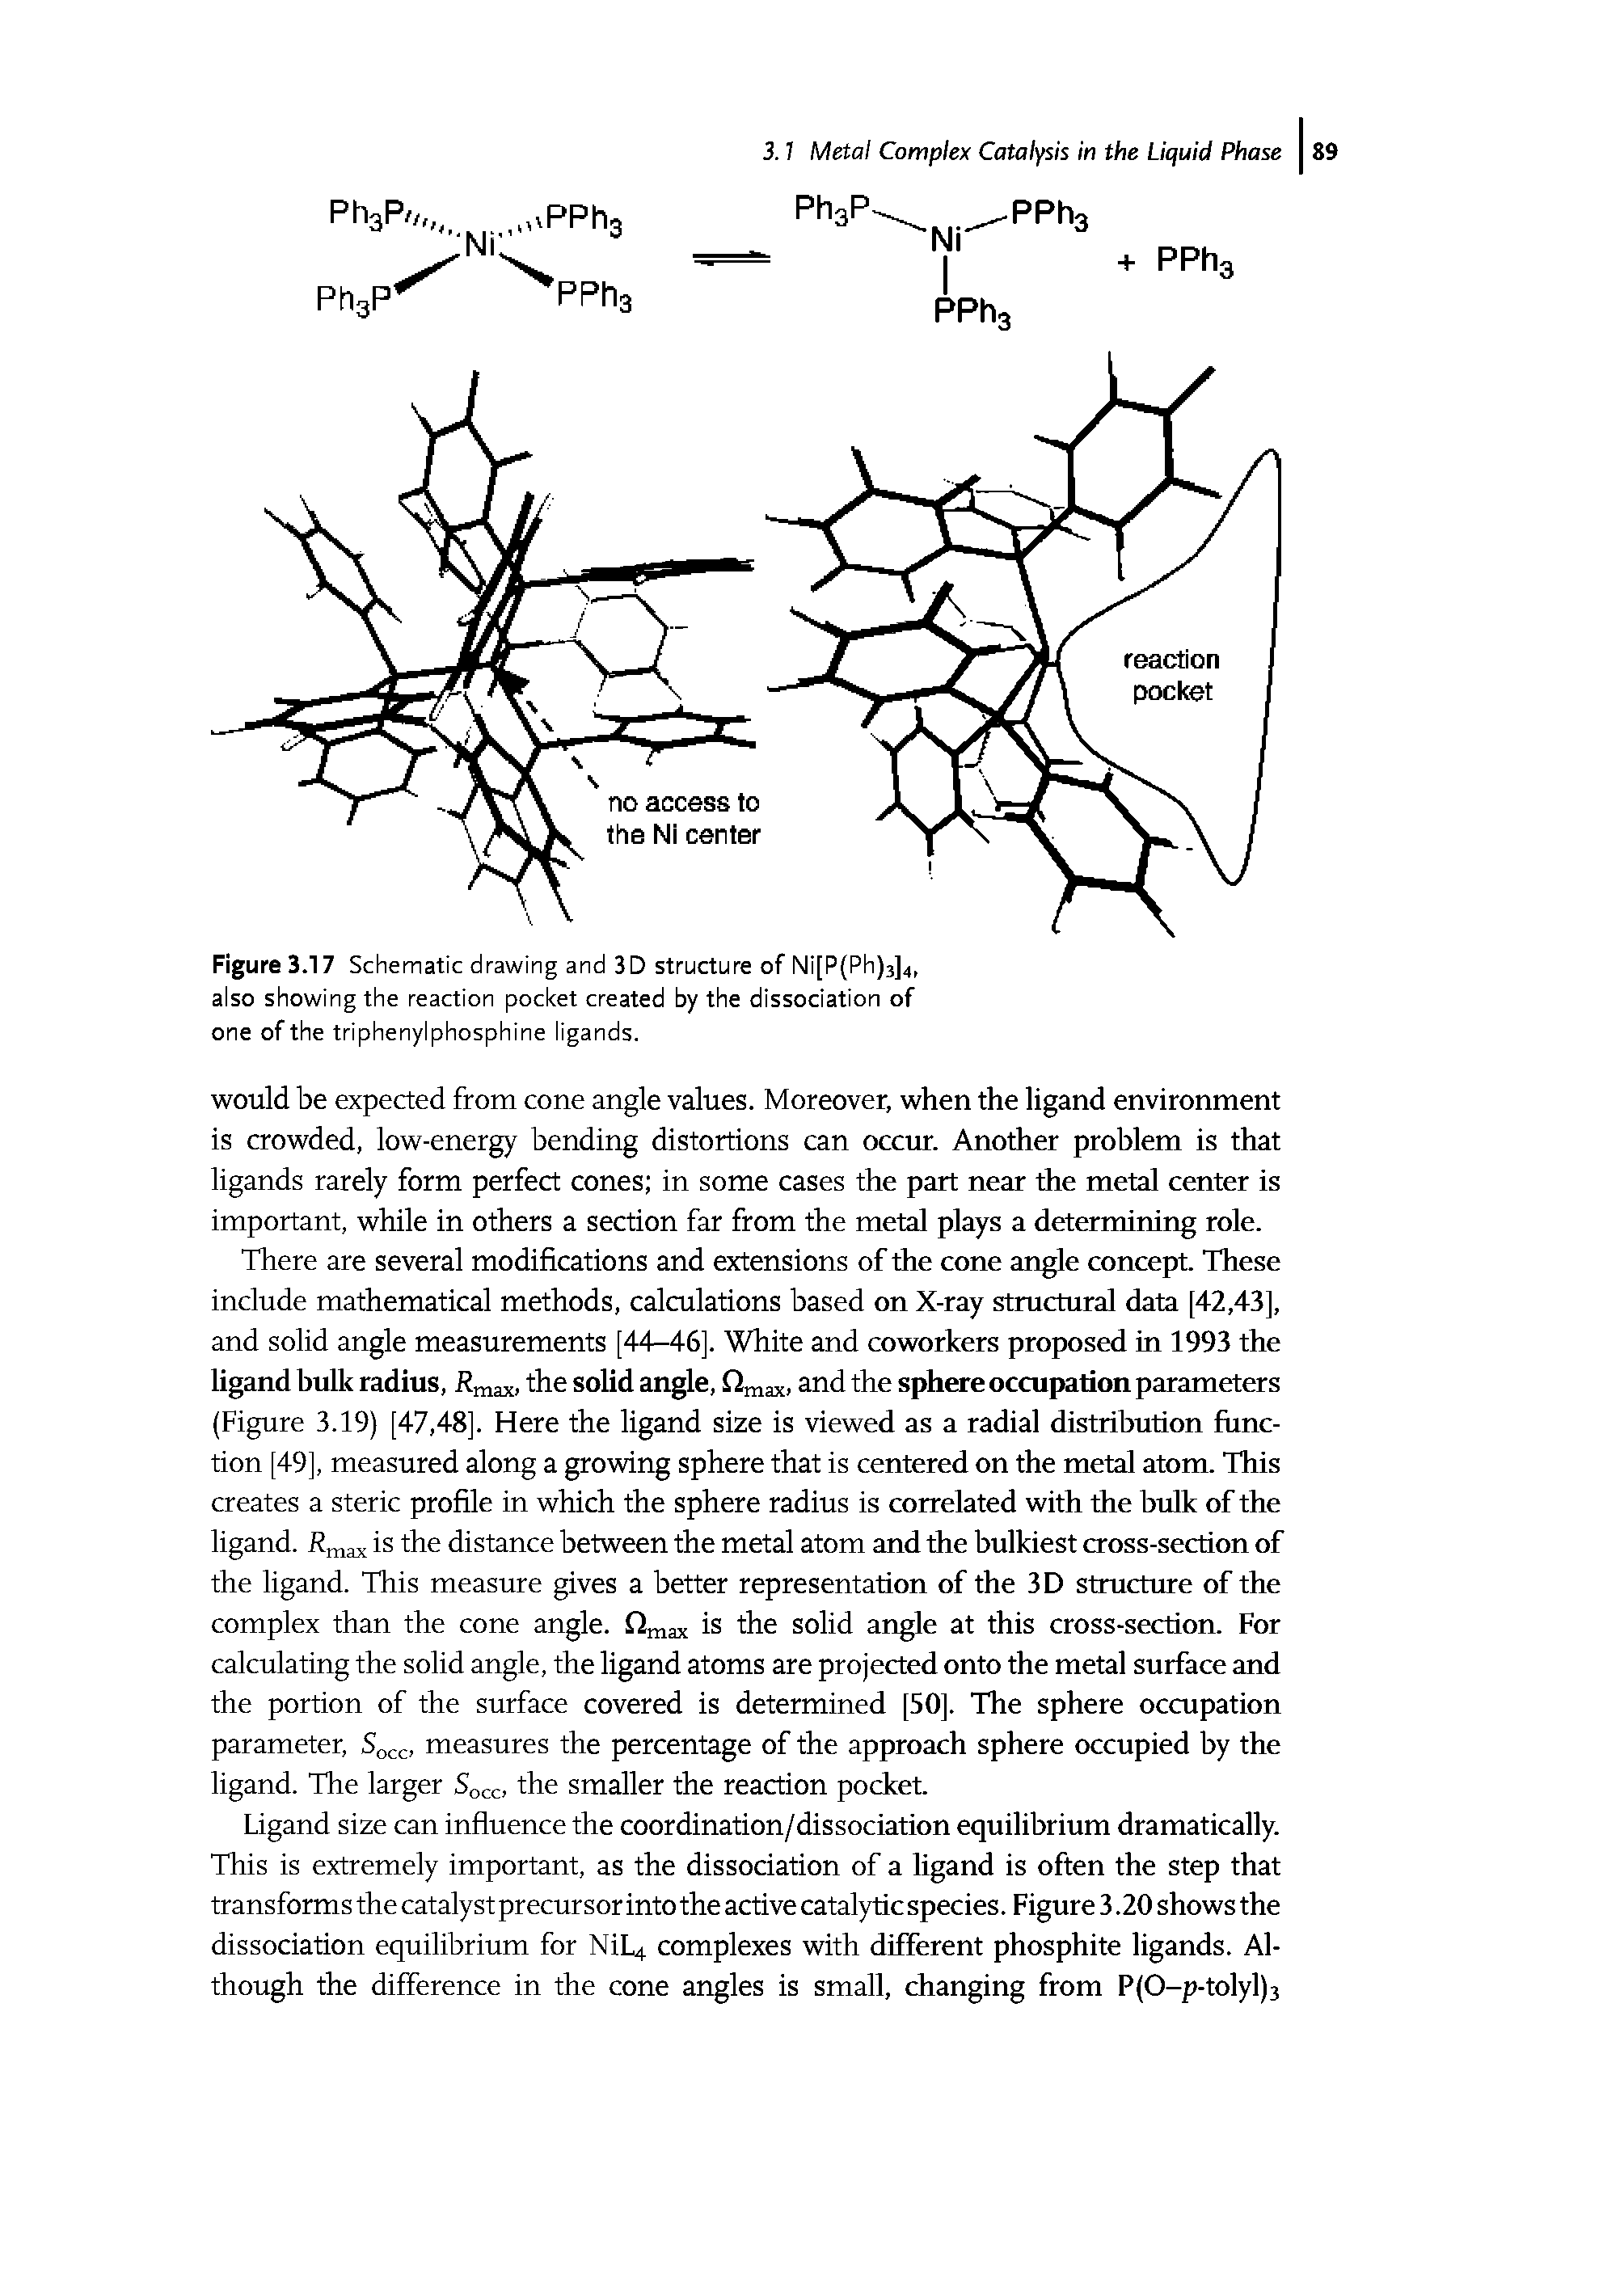 Figure 3.17 Schematic drawing and 3D structure of Ni[P(Ph)3]4, also showing the reaction pocket created by the dissociation of one of the triphenylphosphine ligands.